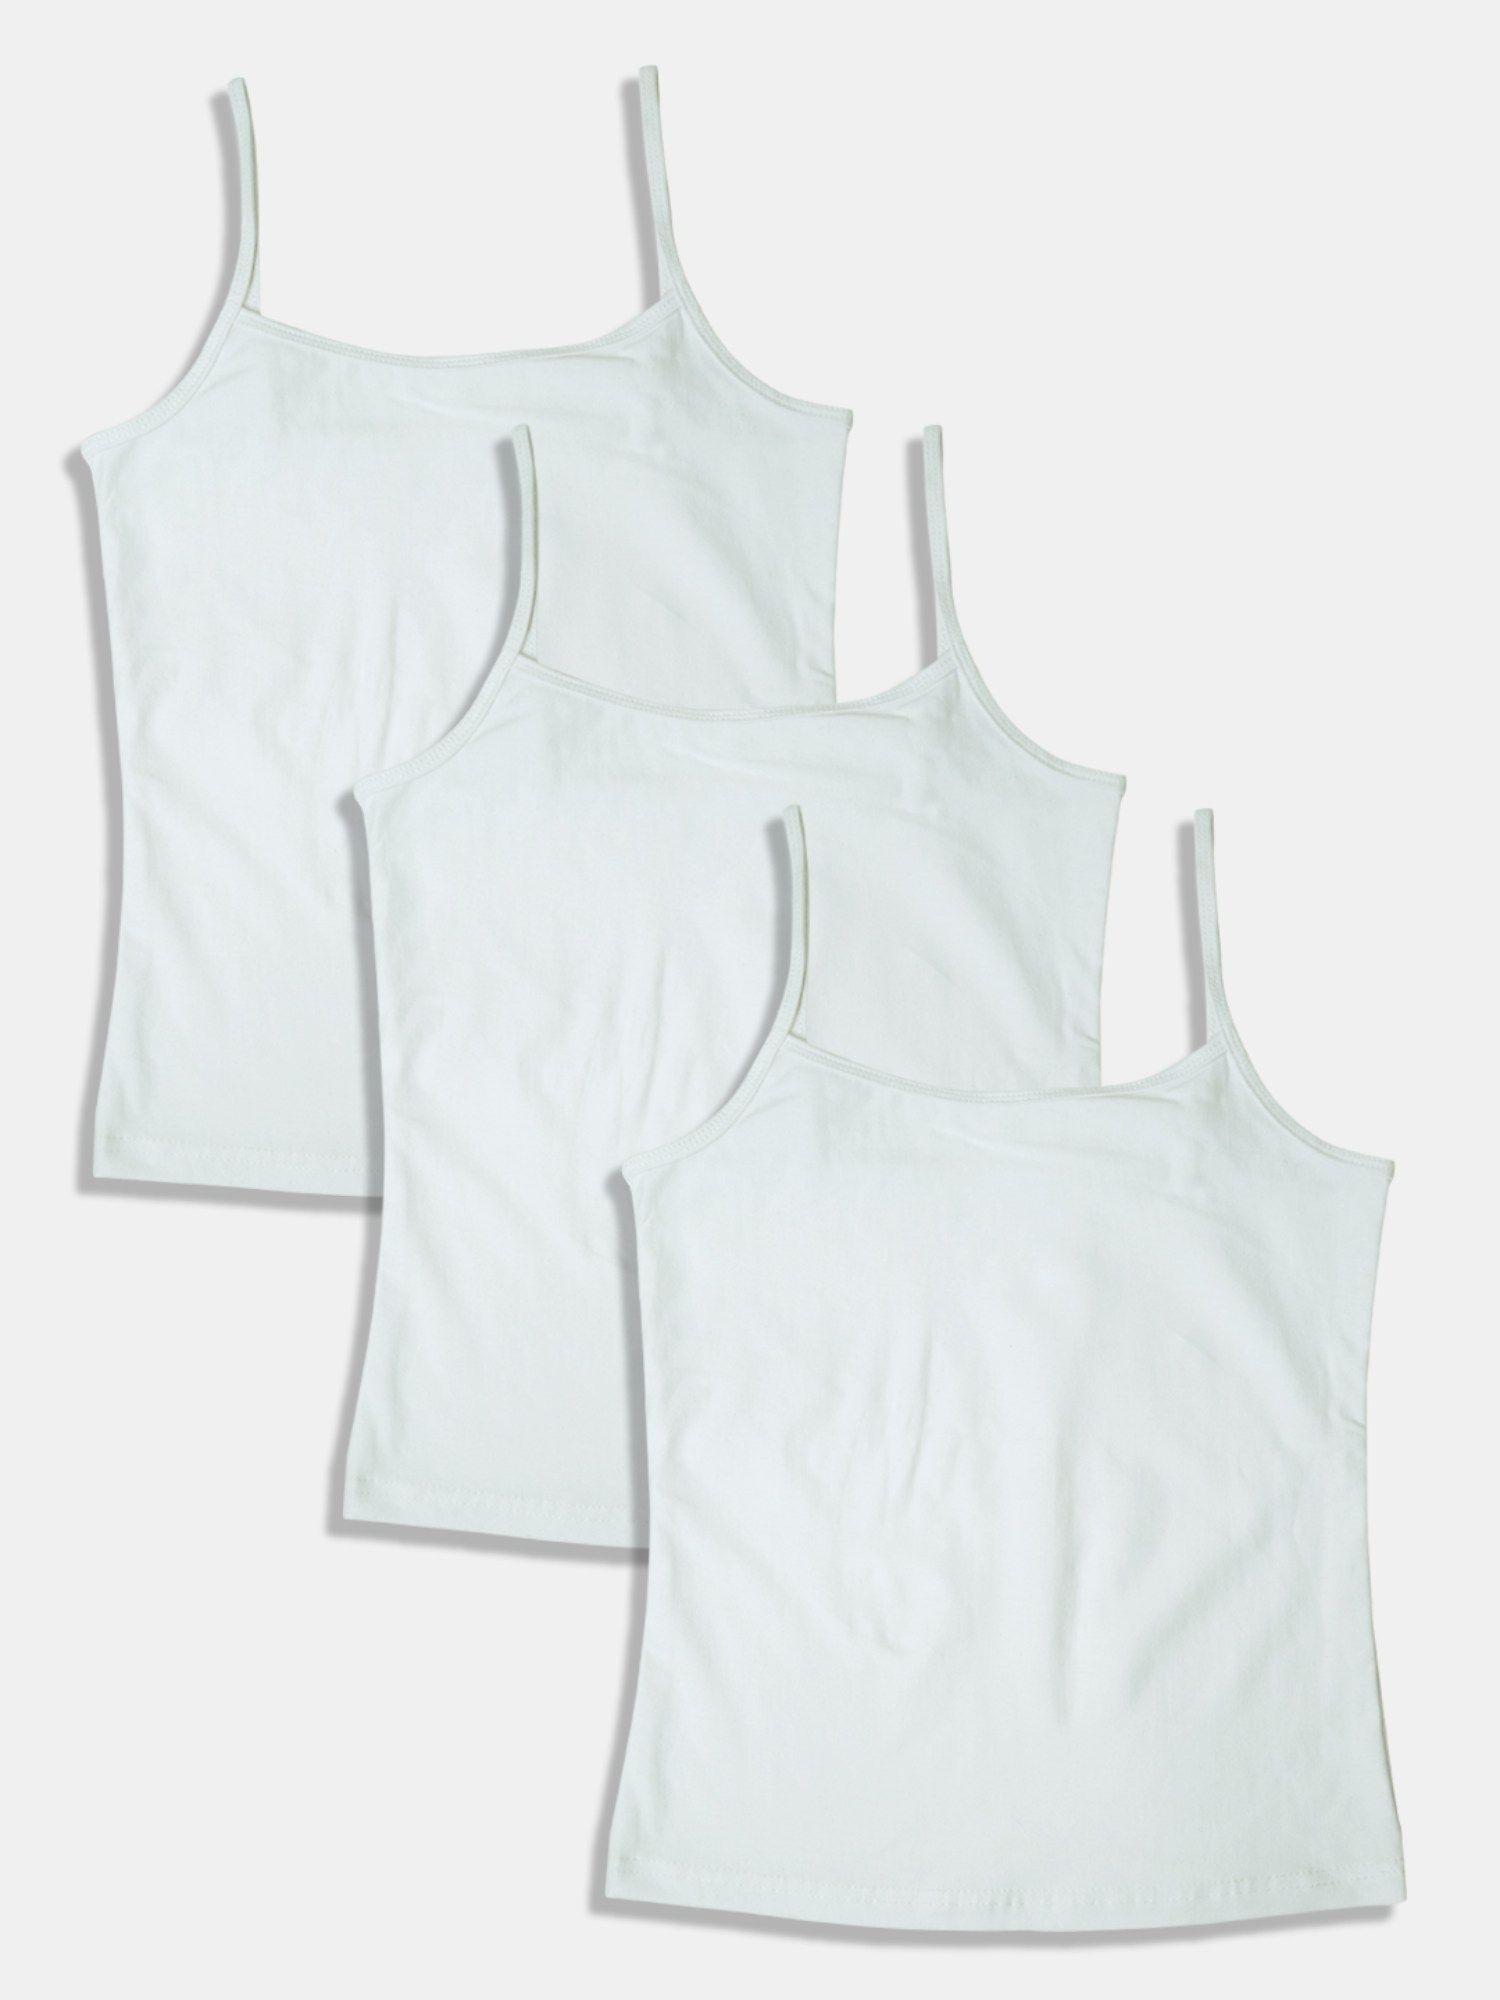 girls white camisoles (pack of 3)